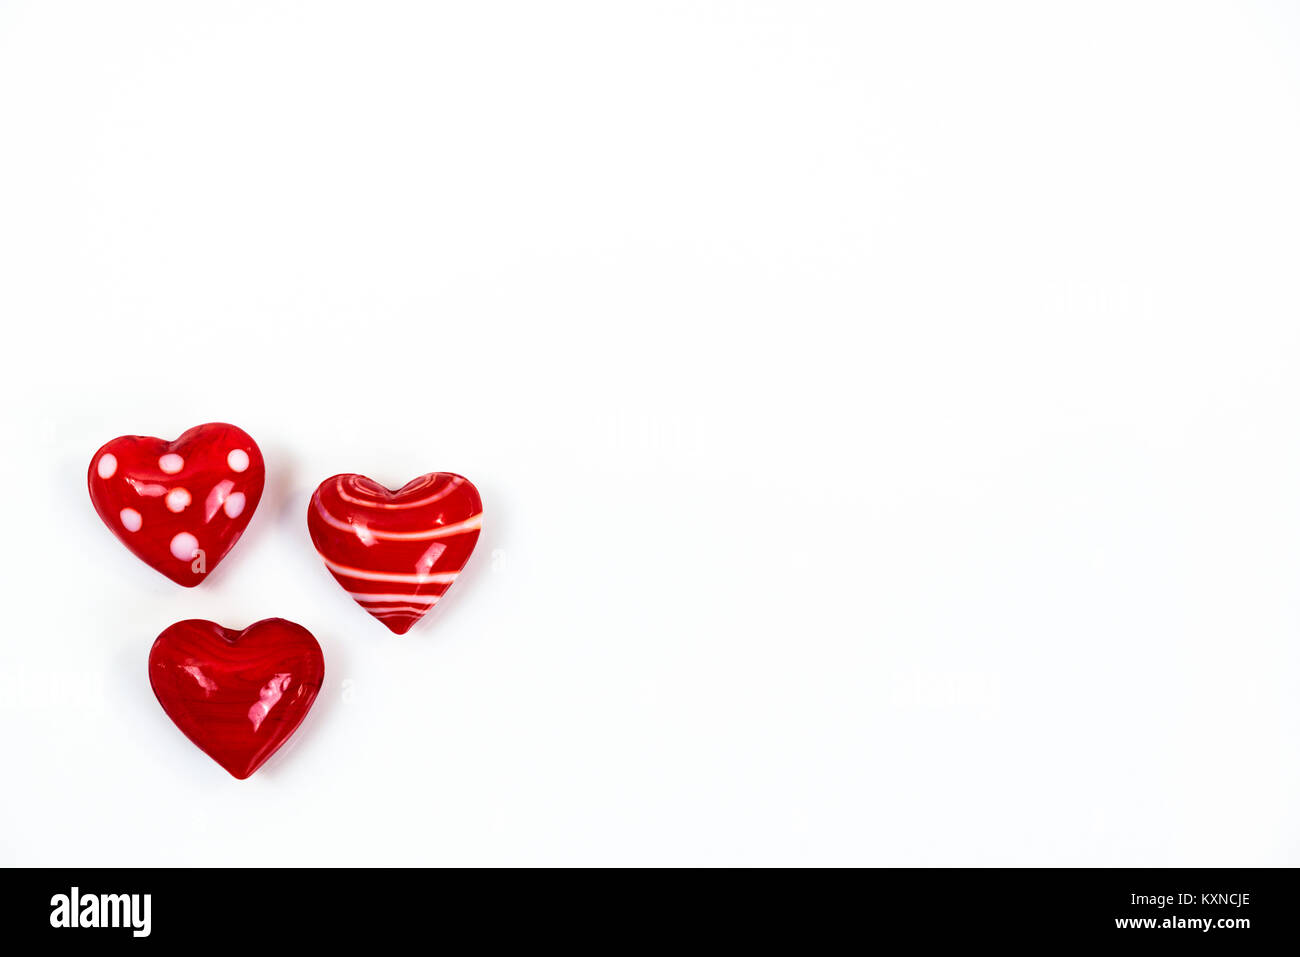 Small cute red heart figurines made of glass isolated on white background Stock Photo